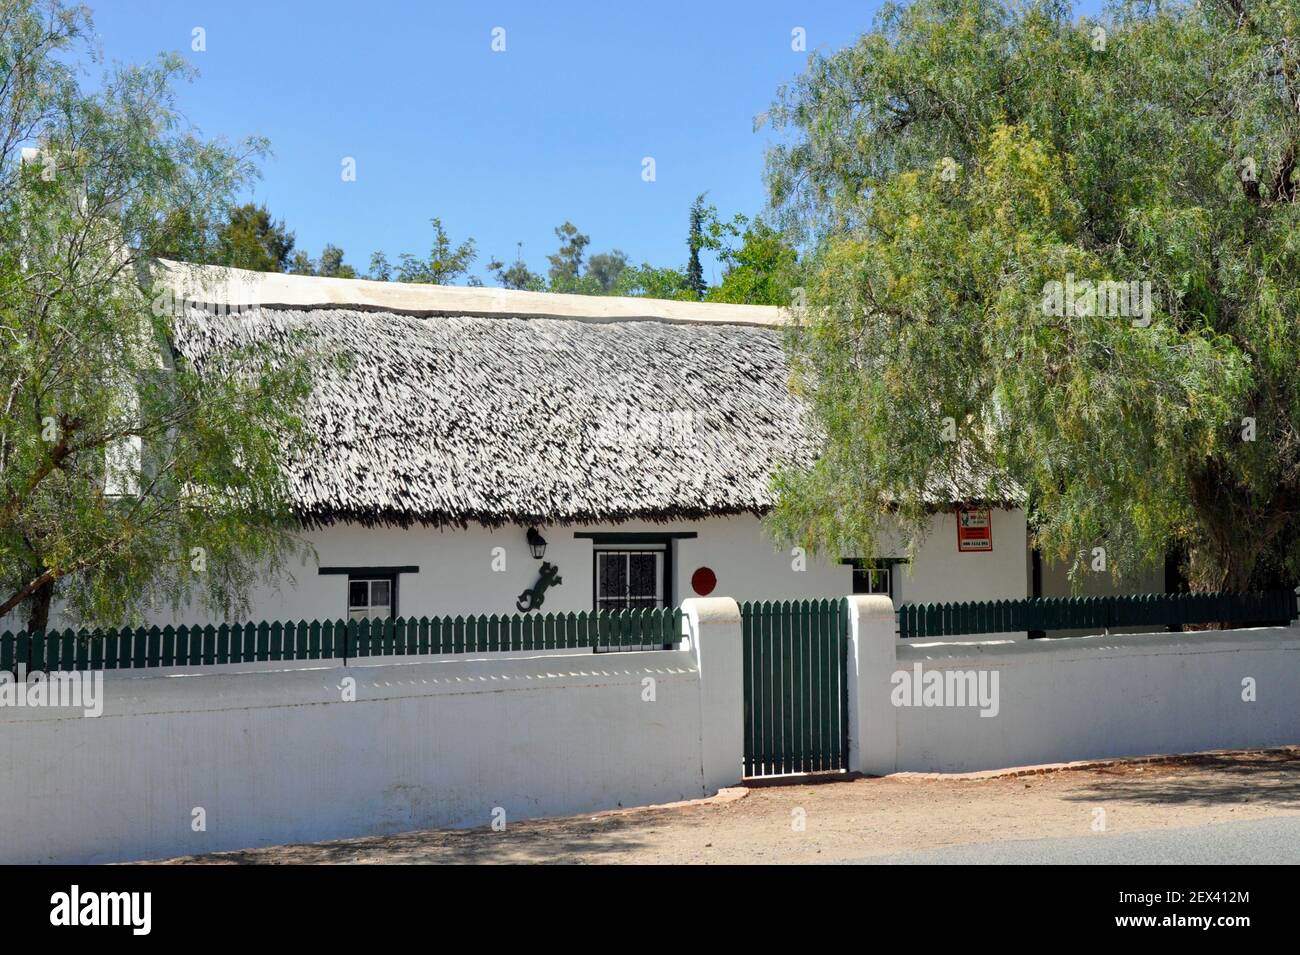 A typical, traditional, white-washed, 19th century thatched cottage in the charming village of McGregor in the Western Cape, South Africa Stock Photo